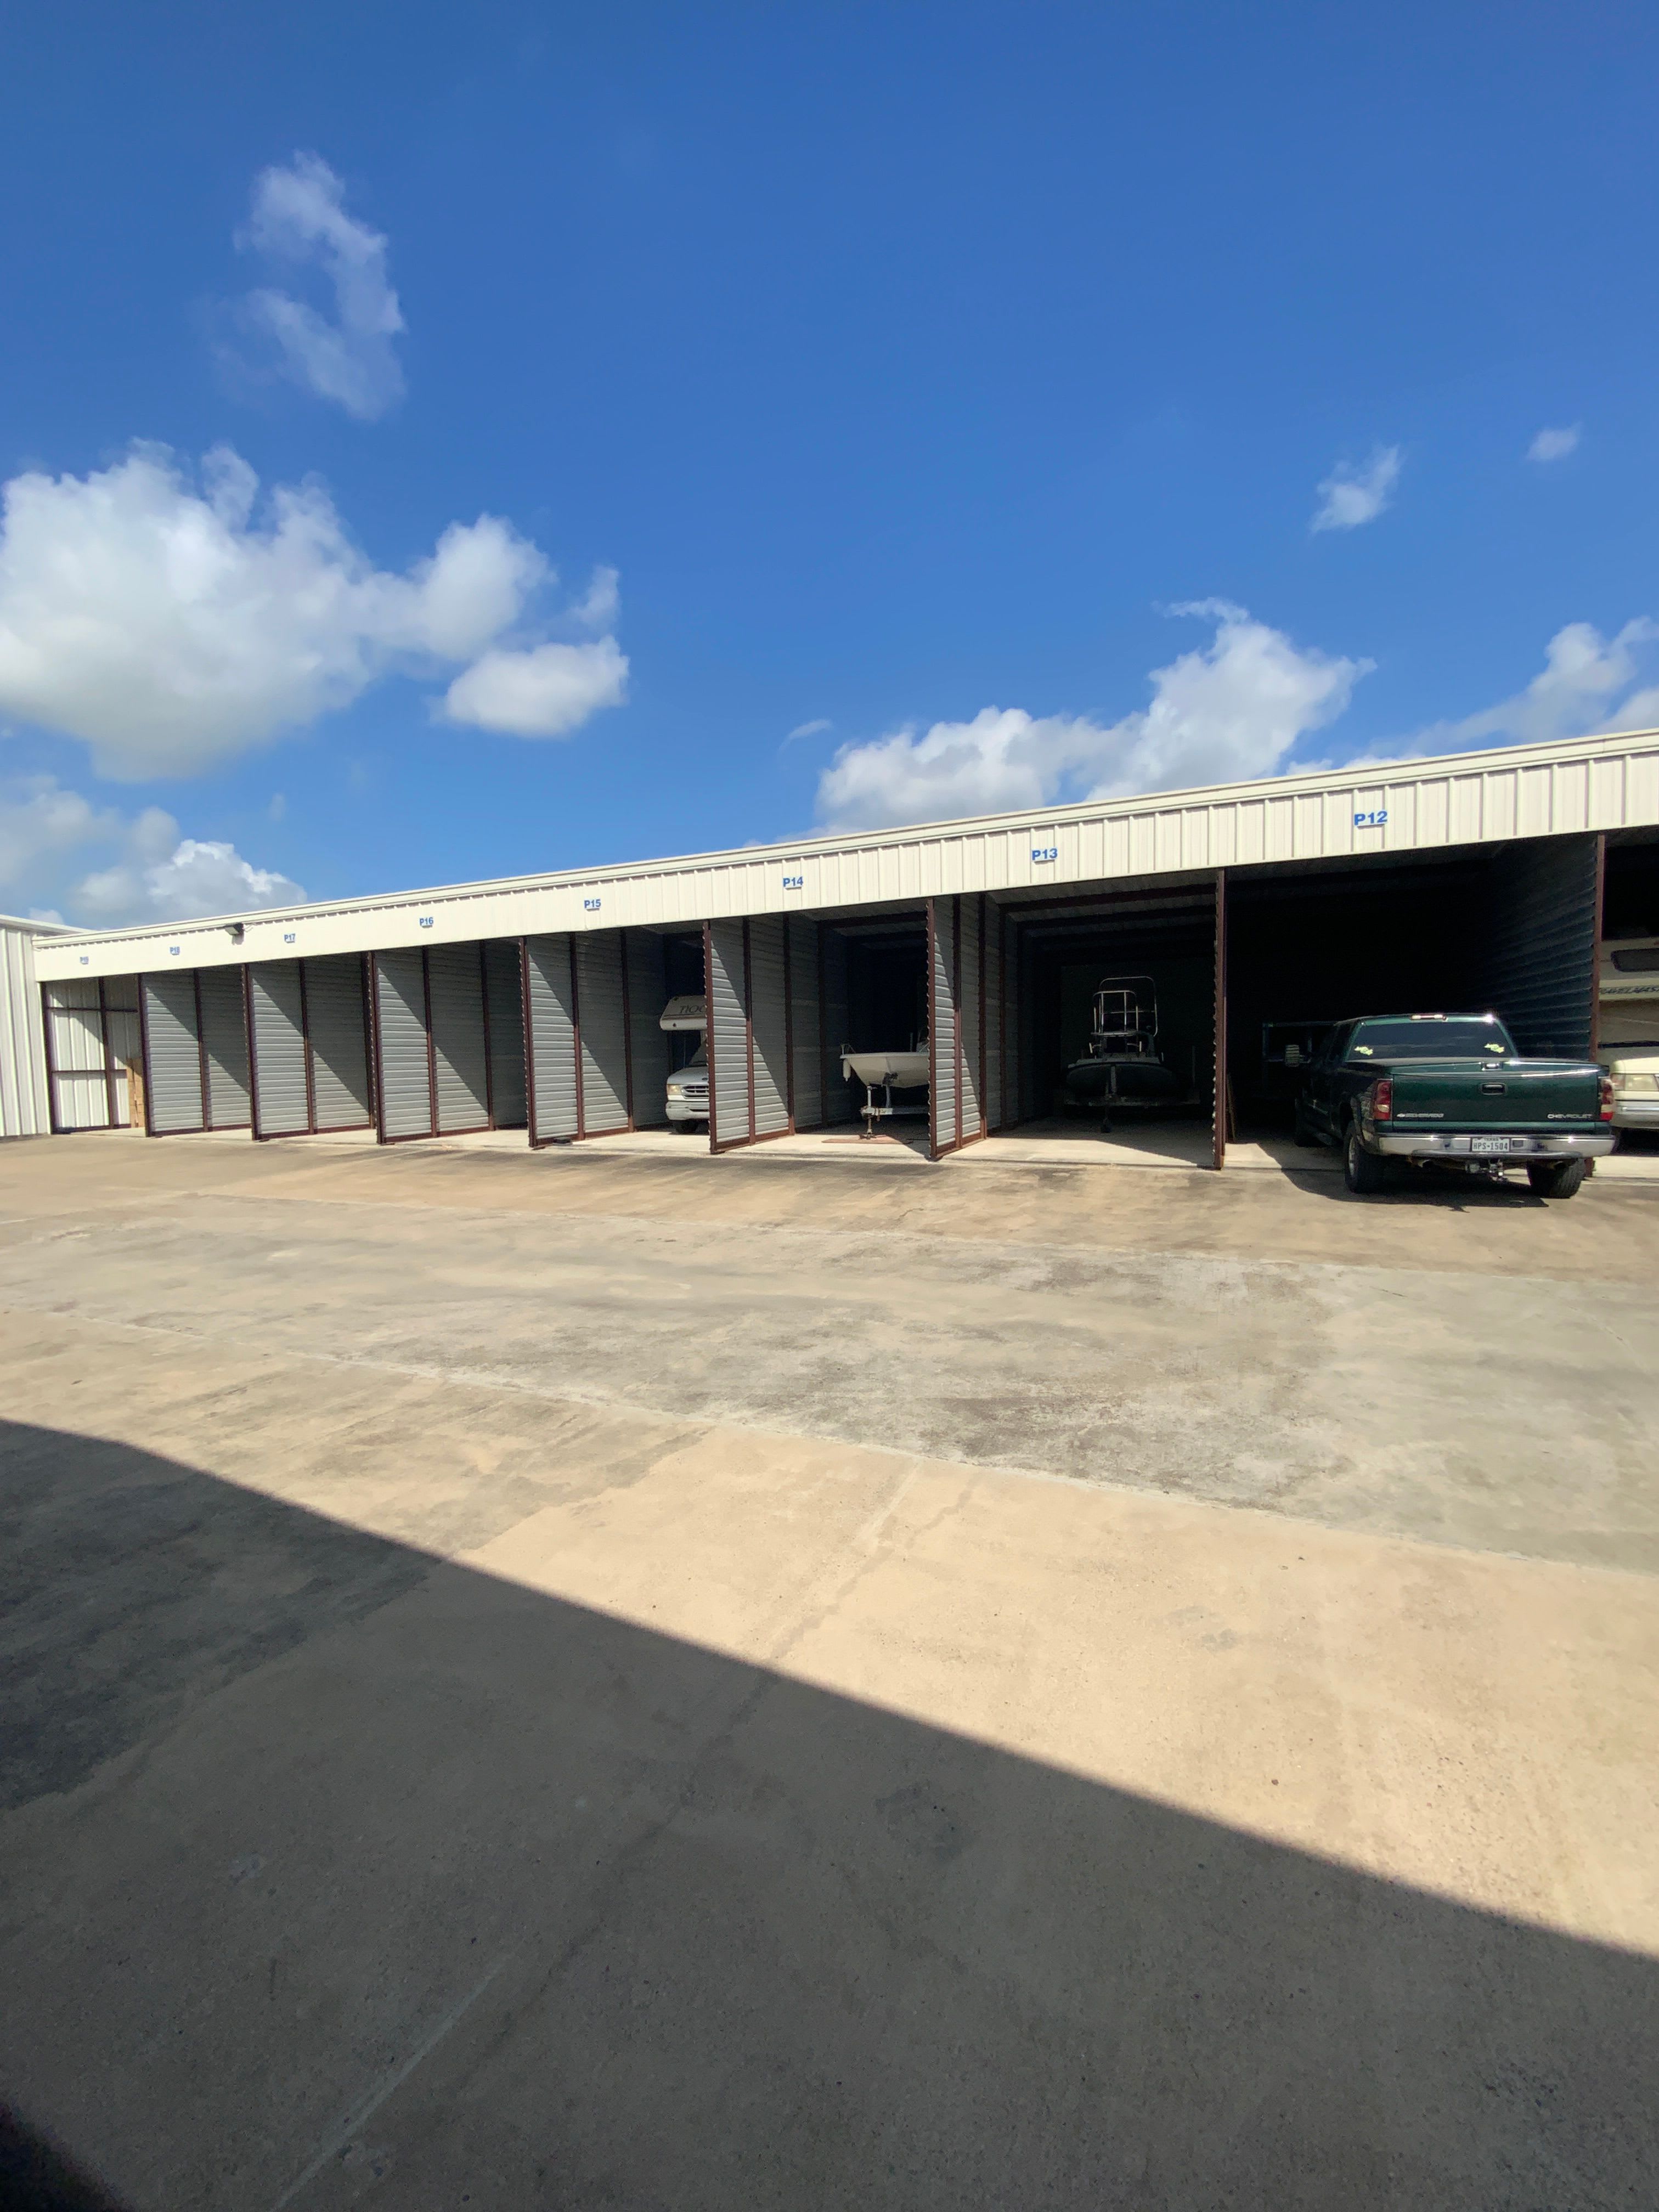 Learn more about auto storage at KO Storage in San Benito, Texas